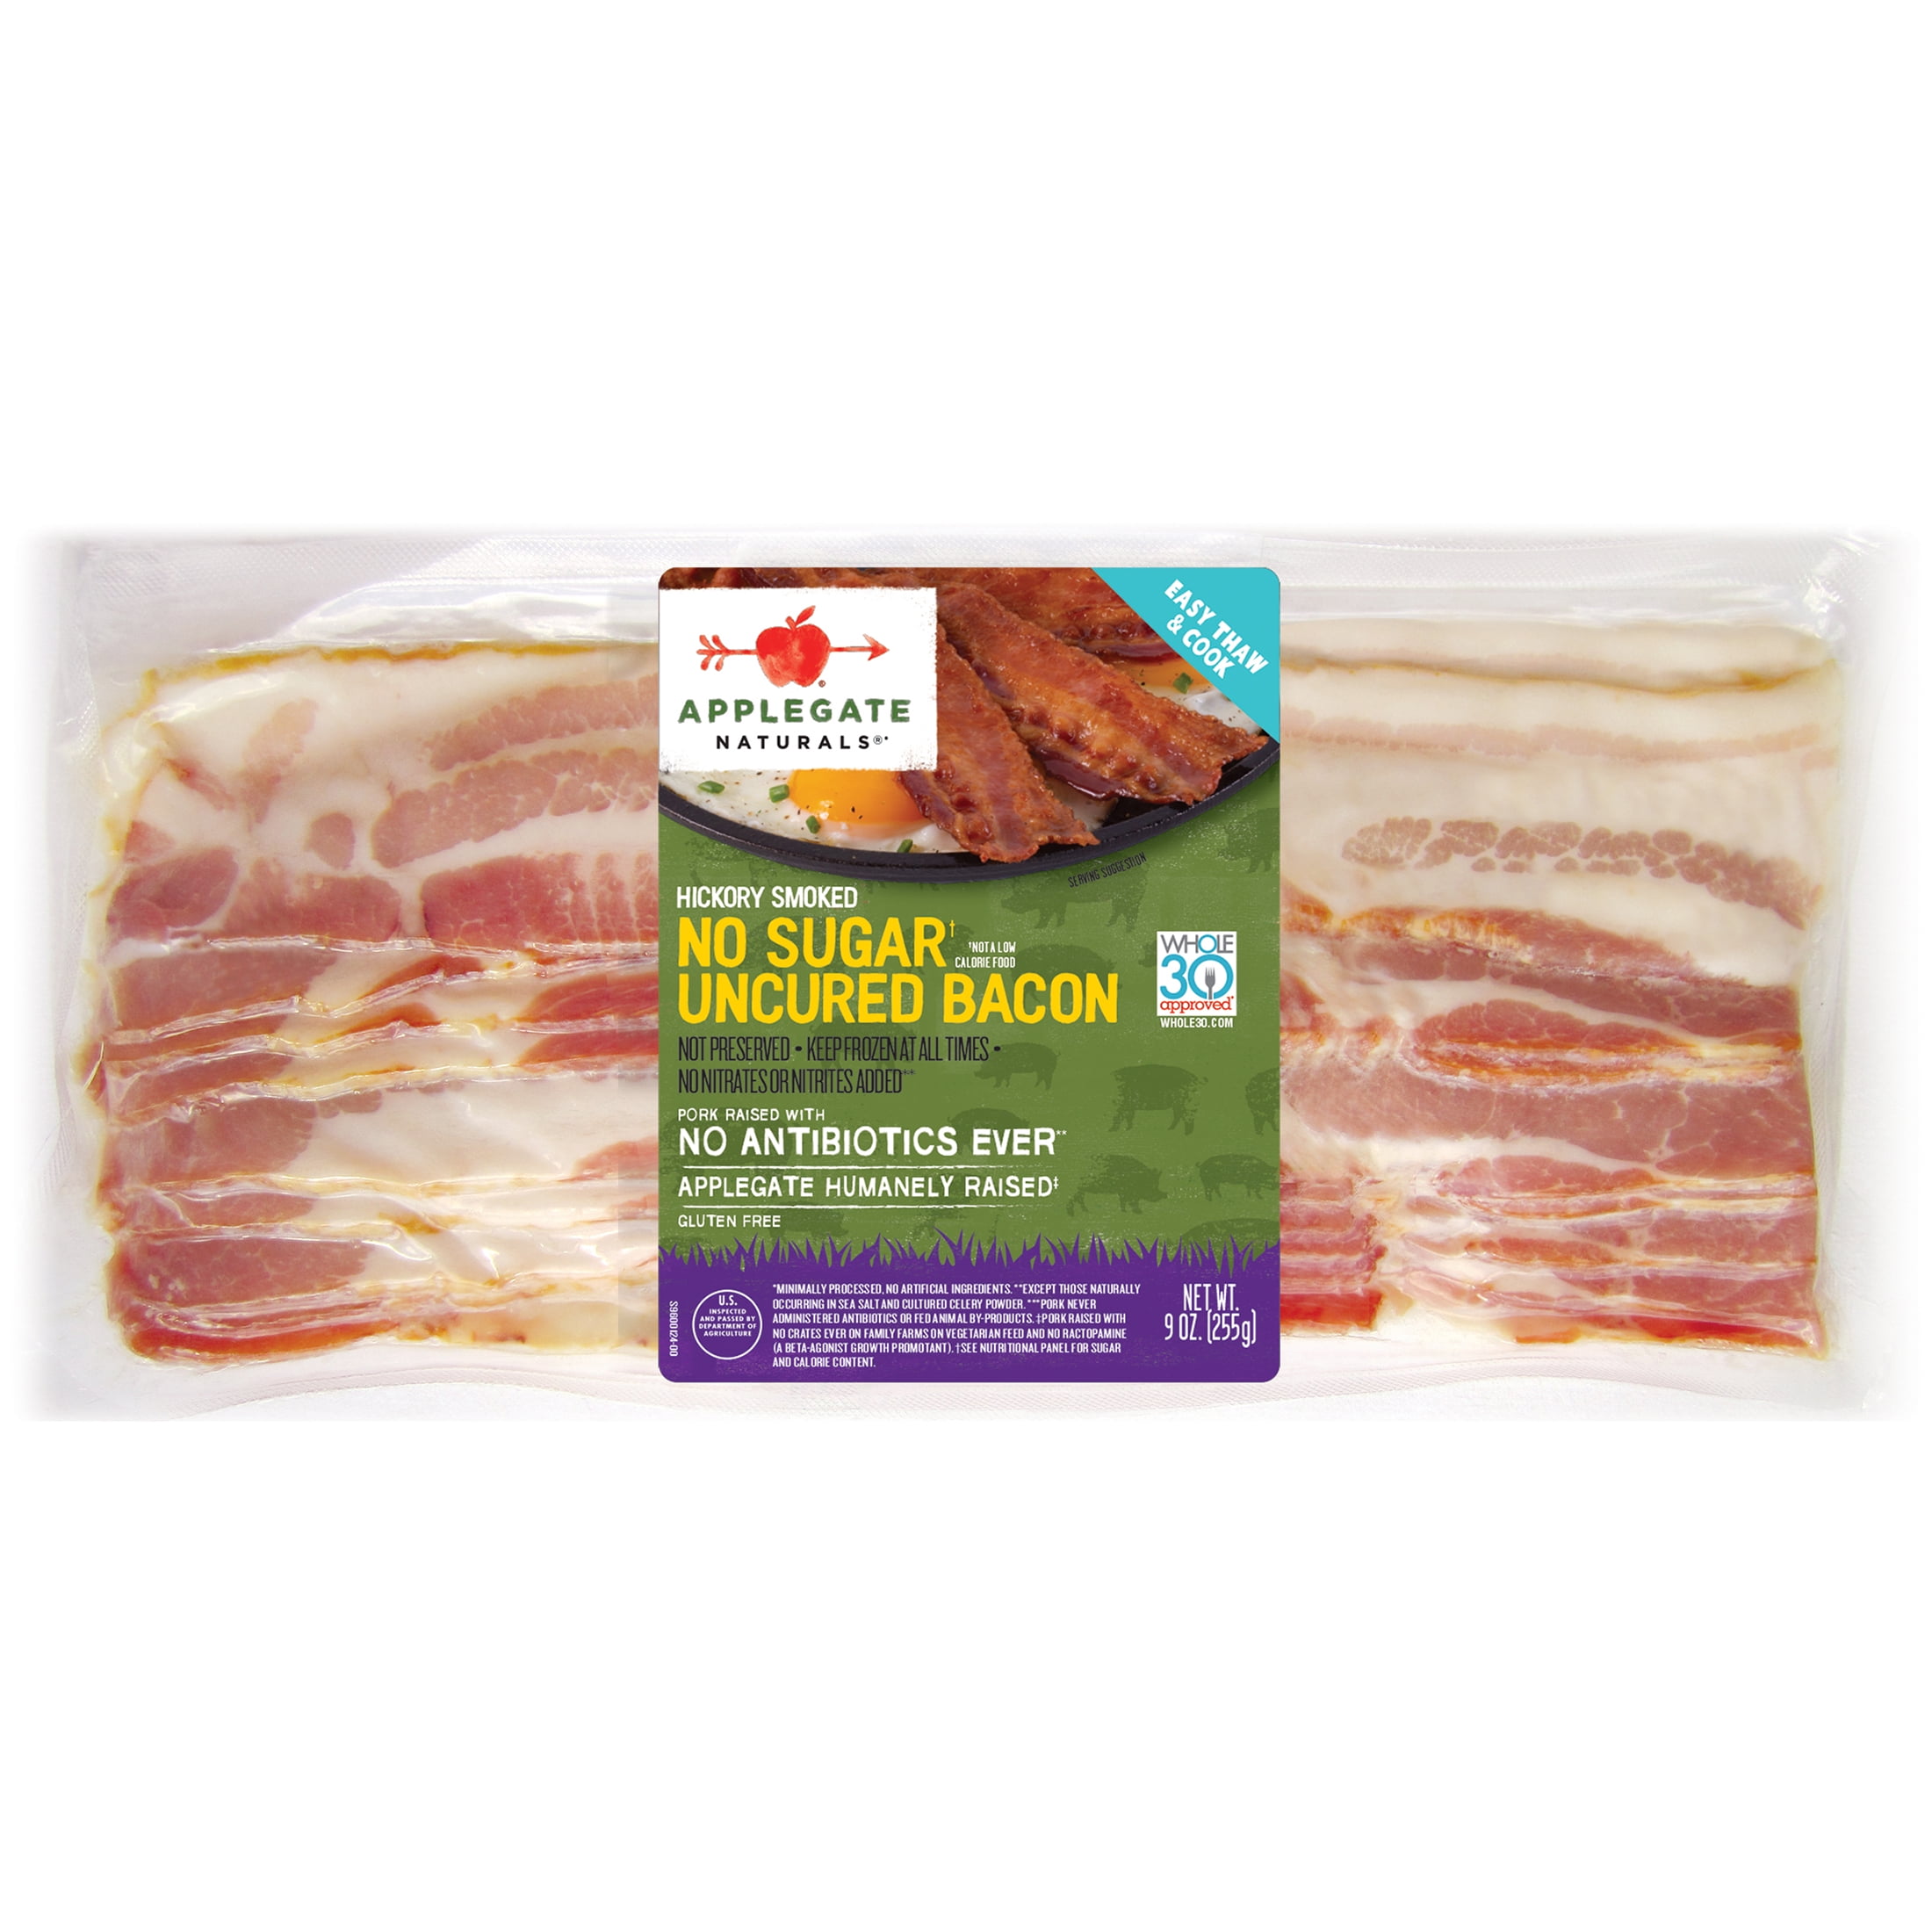 Applegate Natural Hickory Smoked No Sugar Uncured Bacon, 9oz (Frozen)